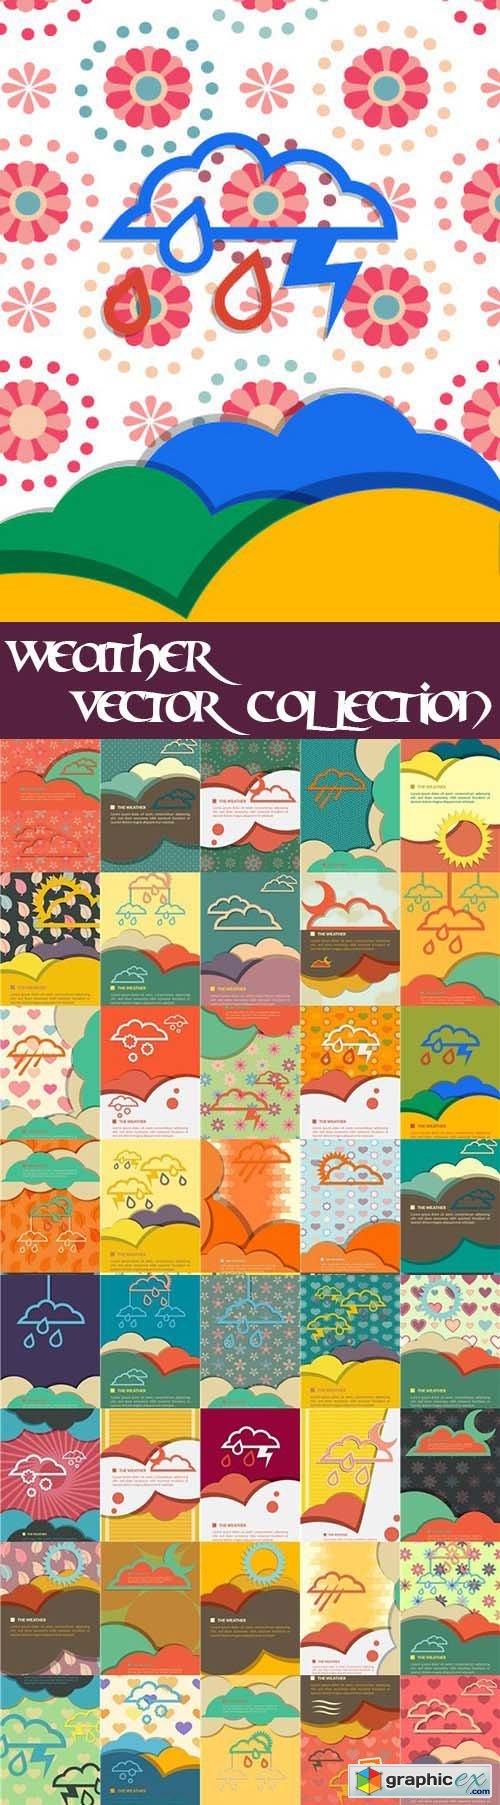 Weather Vector Collection